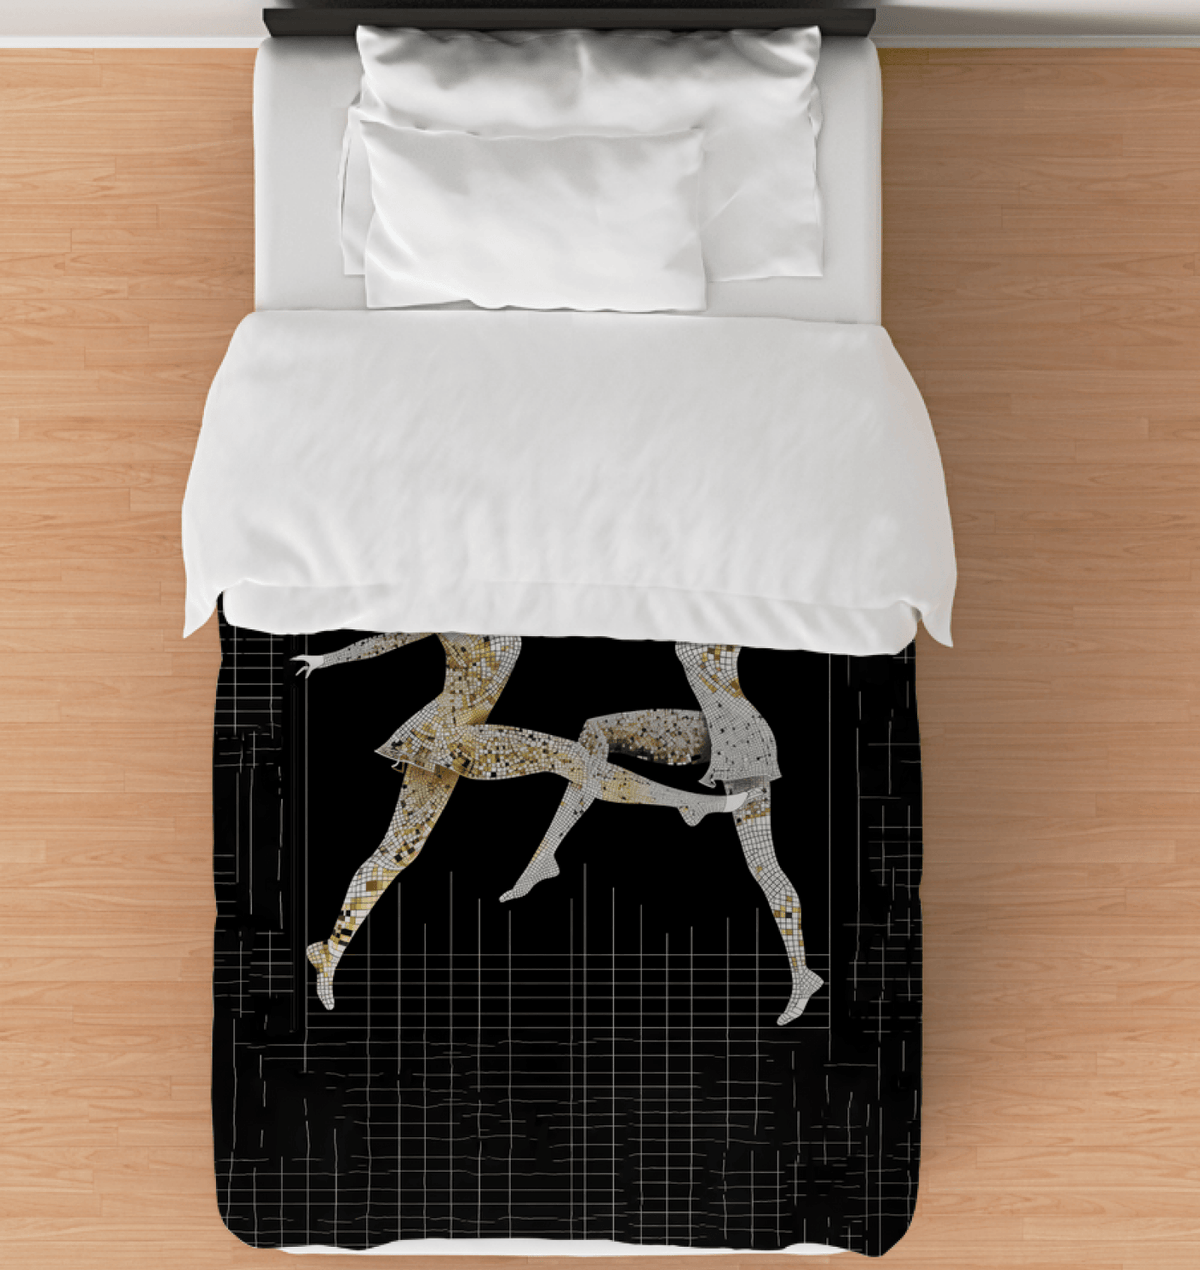 Graceful ballet dancer silhouette design on a soft duvet cover, perfect for a serene bedroom ambiance.